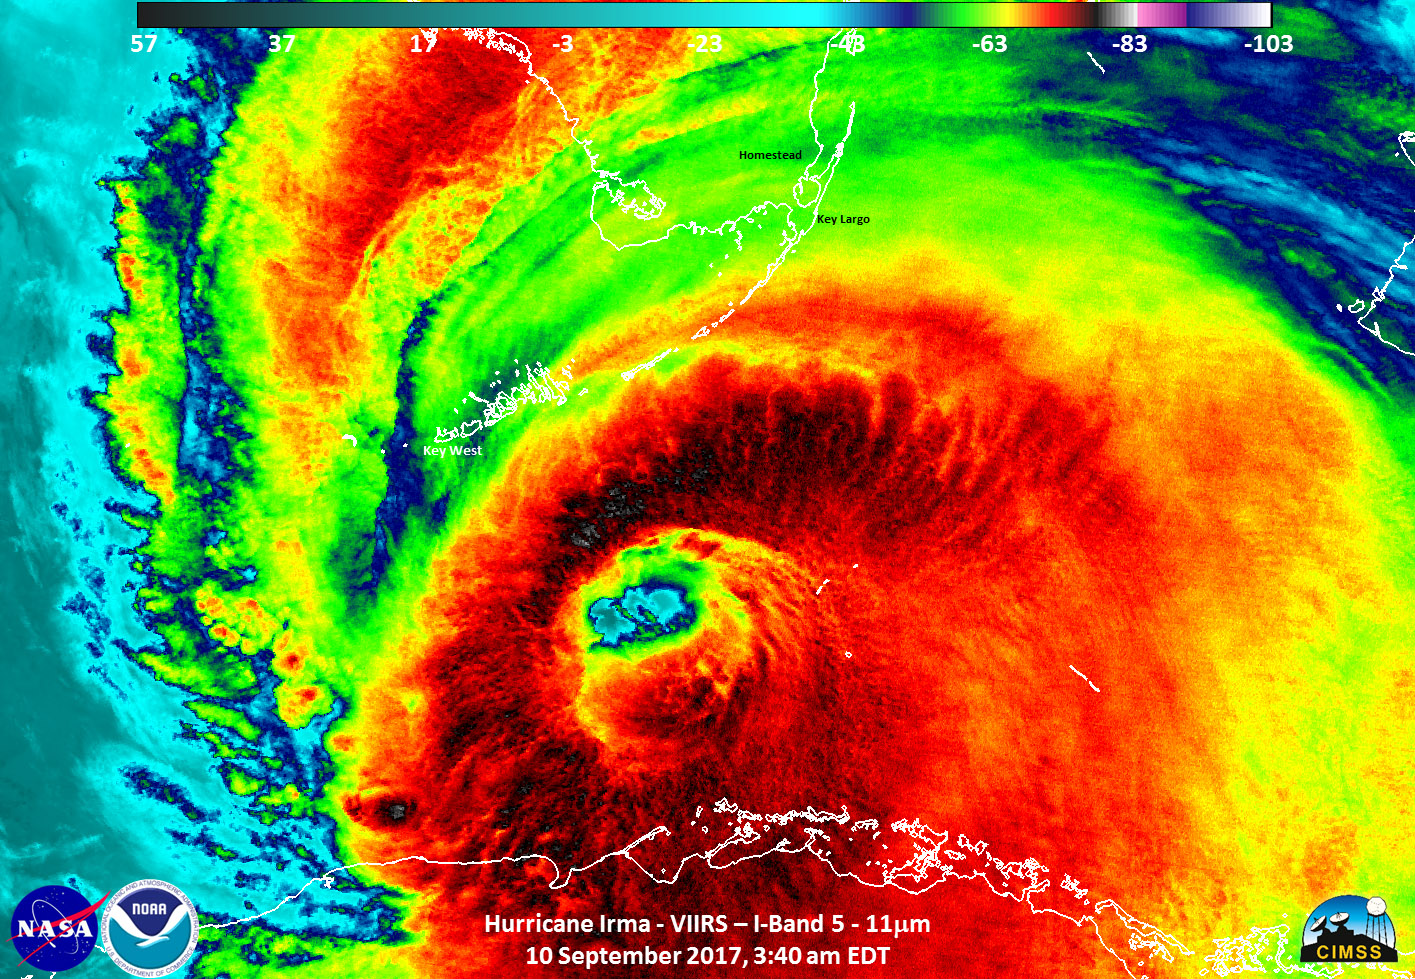 Infrared satellite image of Irma, with clouds in red, yellows, and greens.